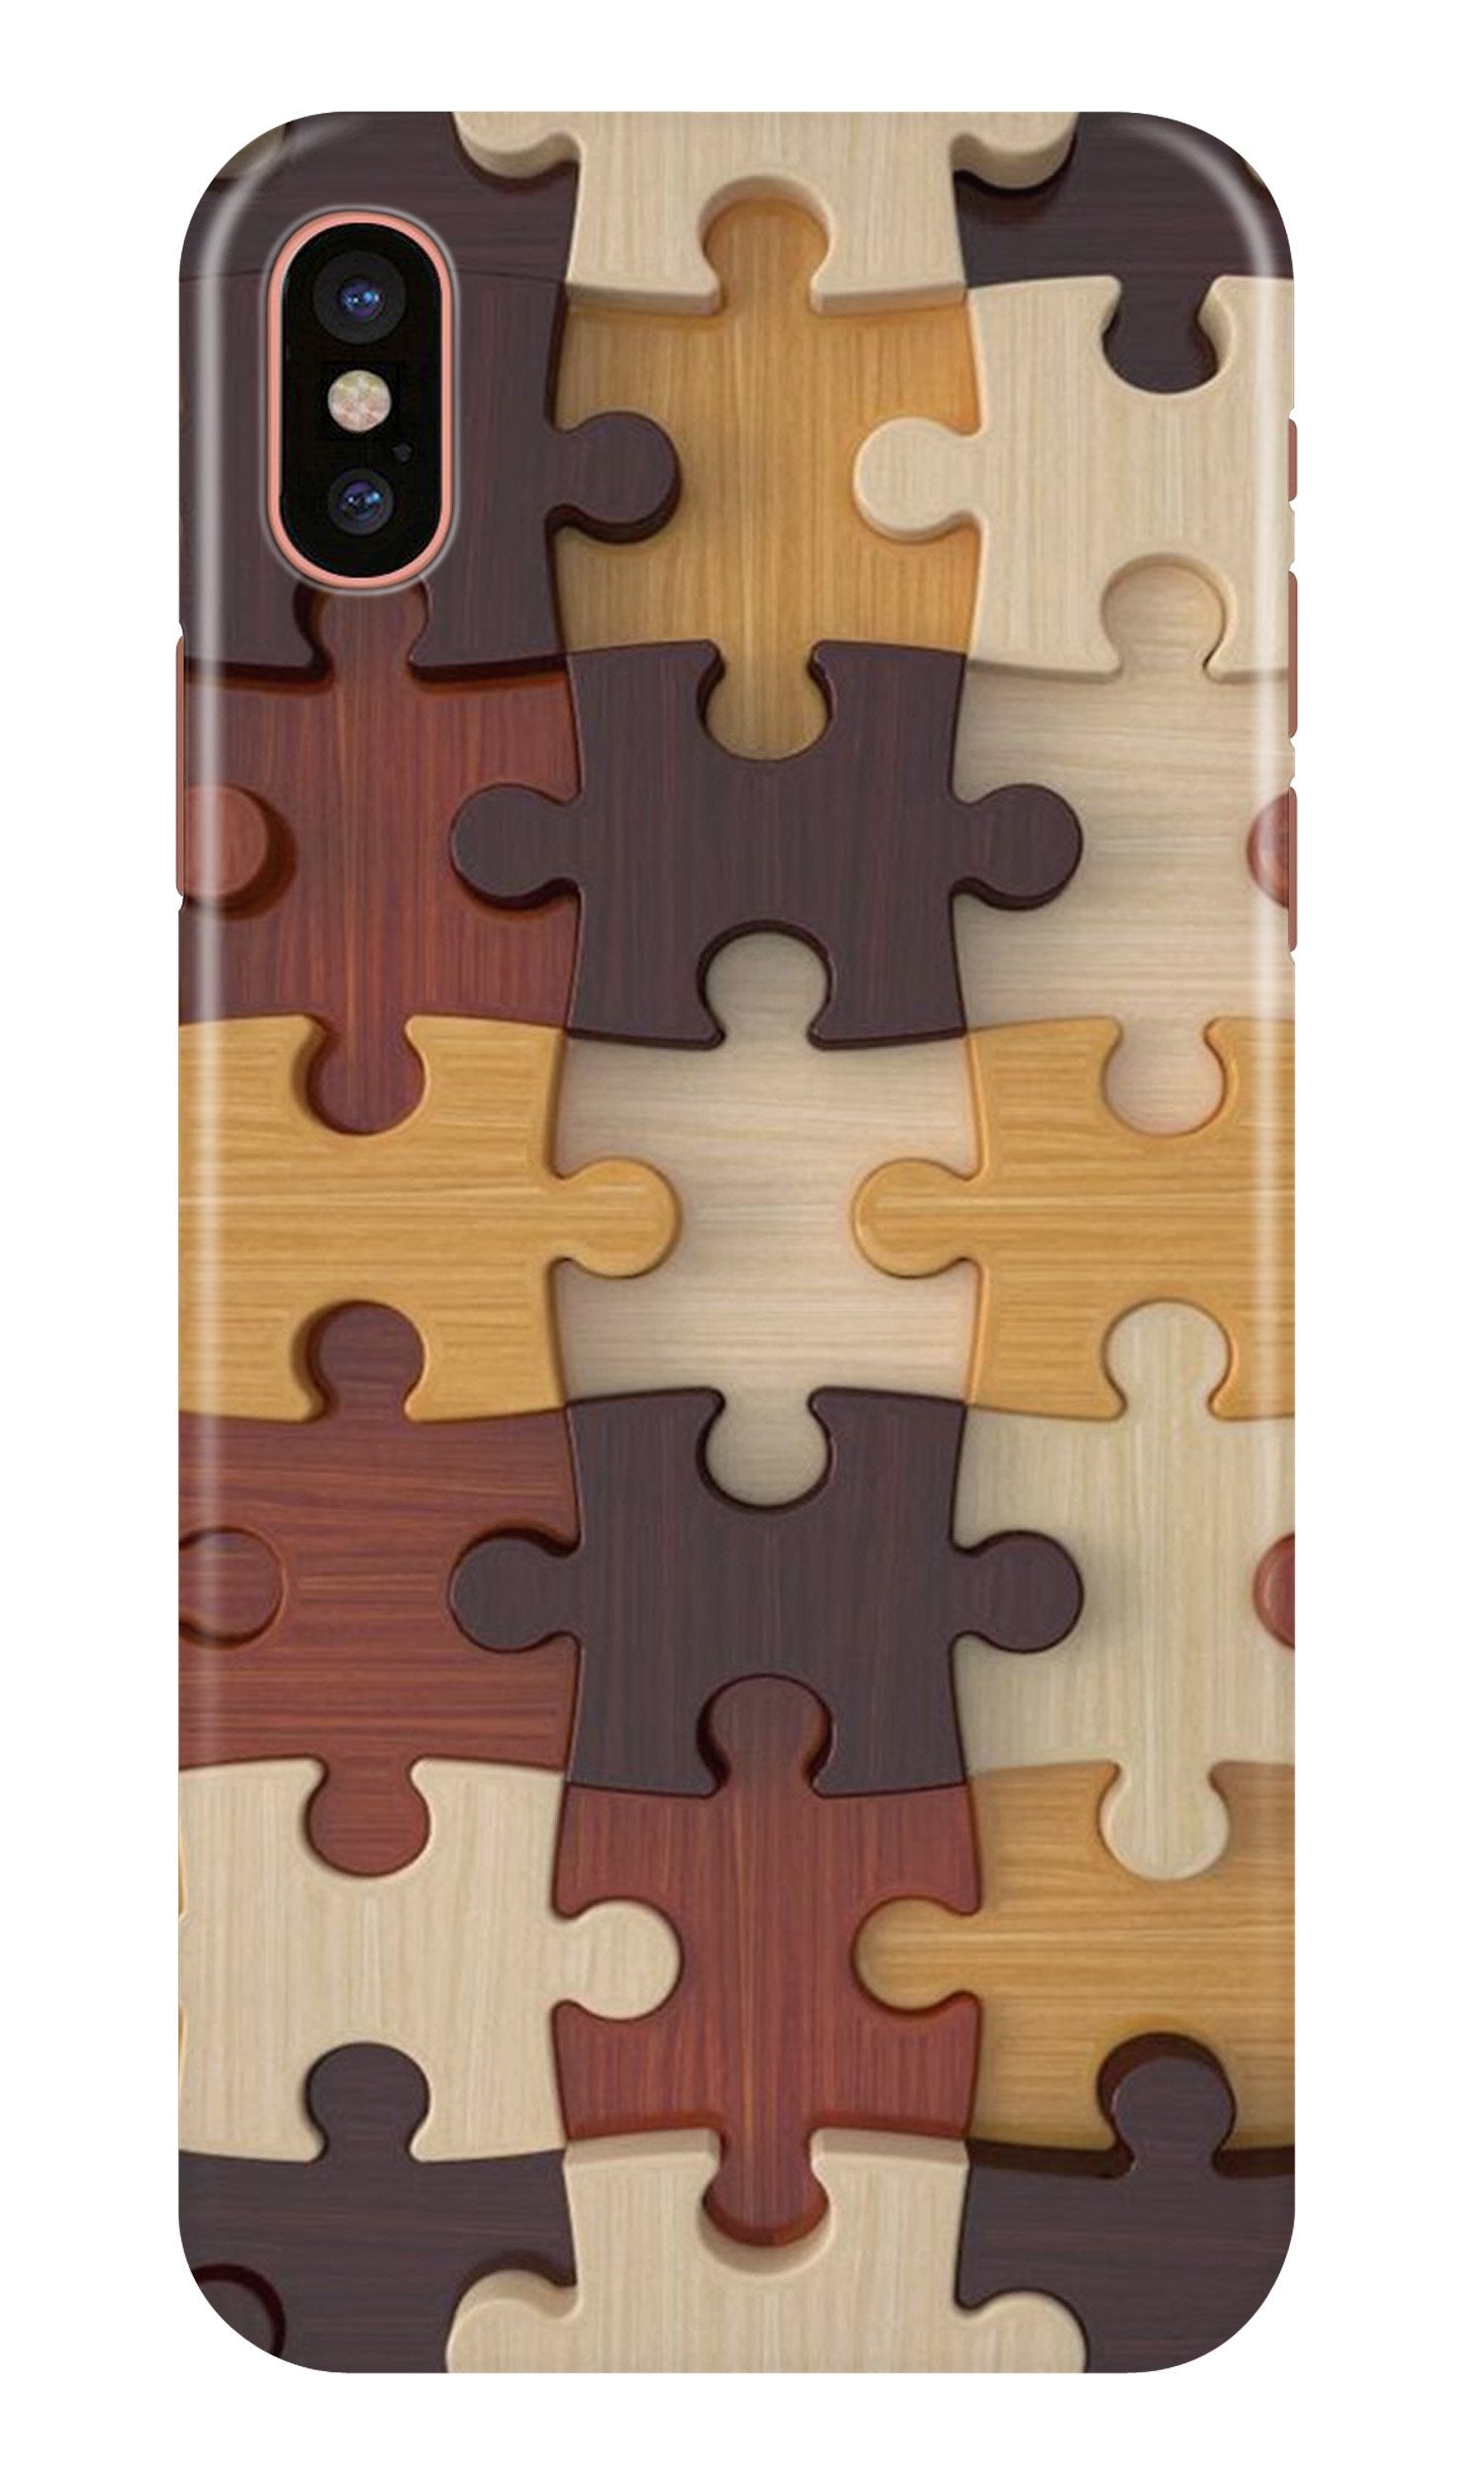 Puzzle Pattern Case for iPhone Xr (Design No. 217)